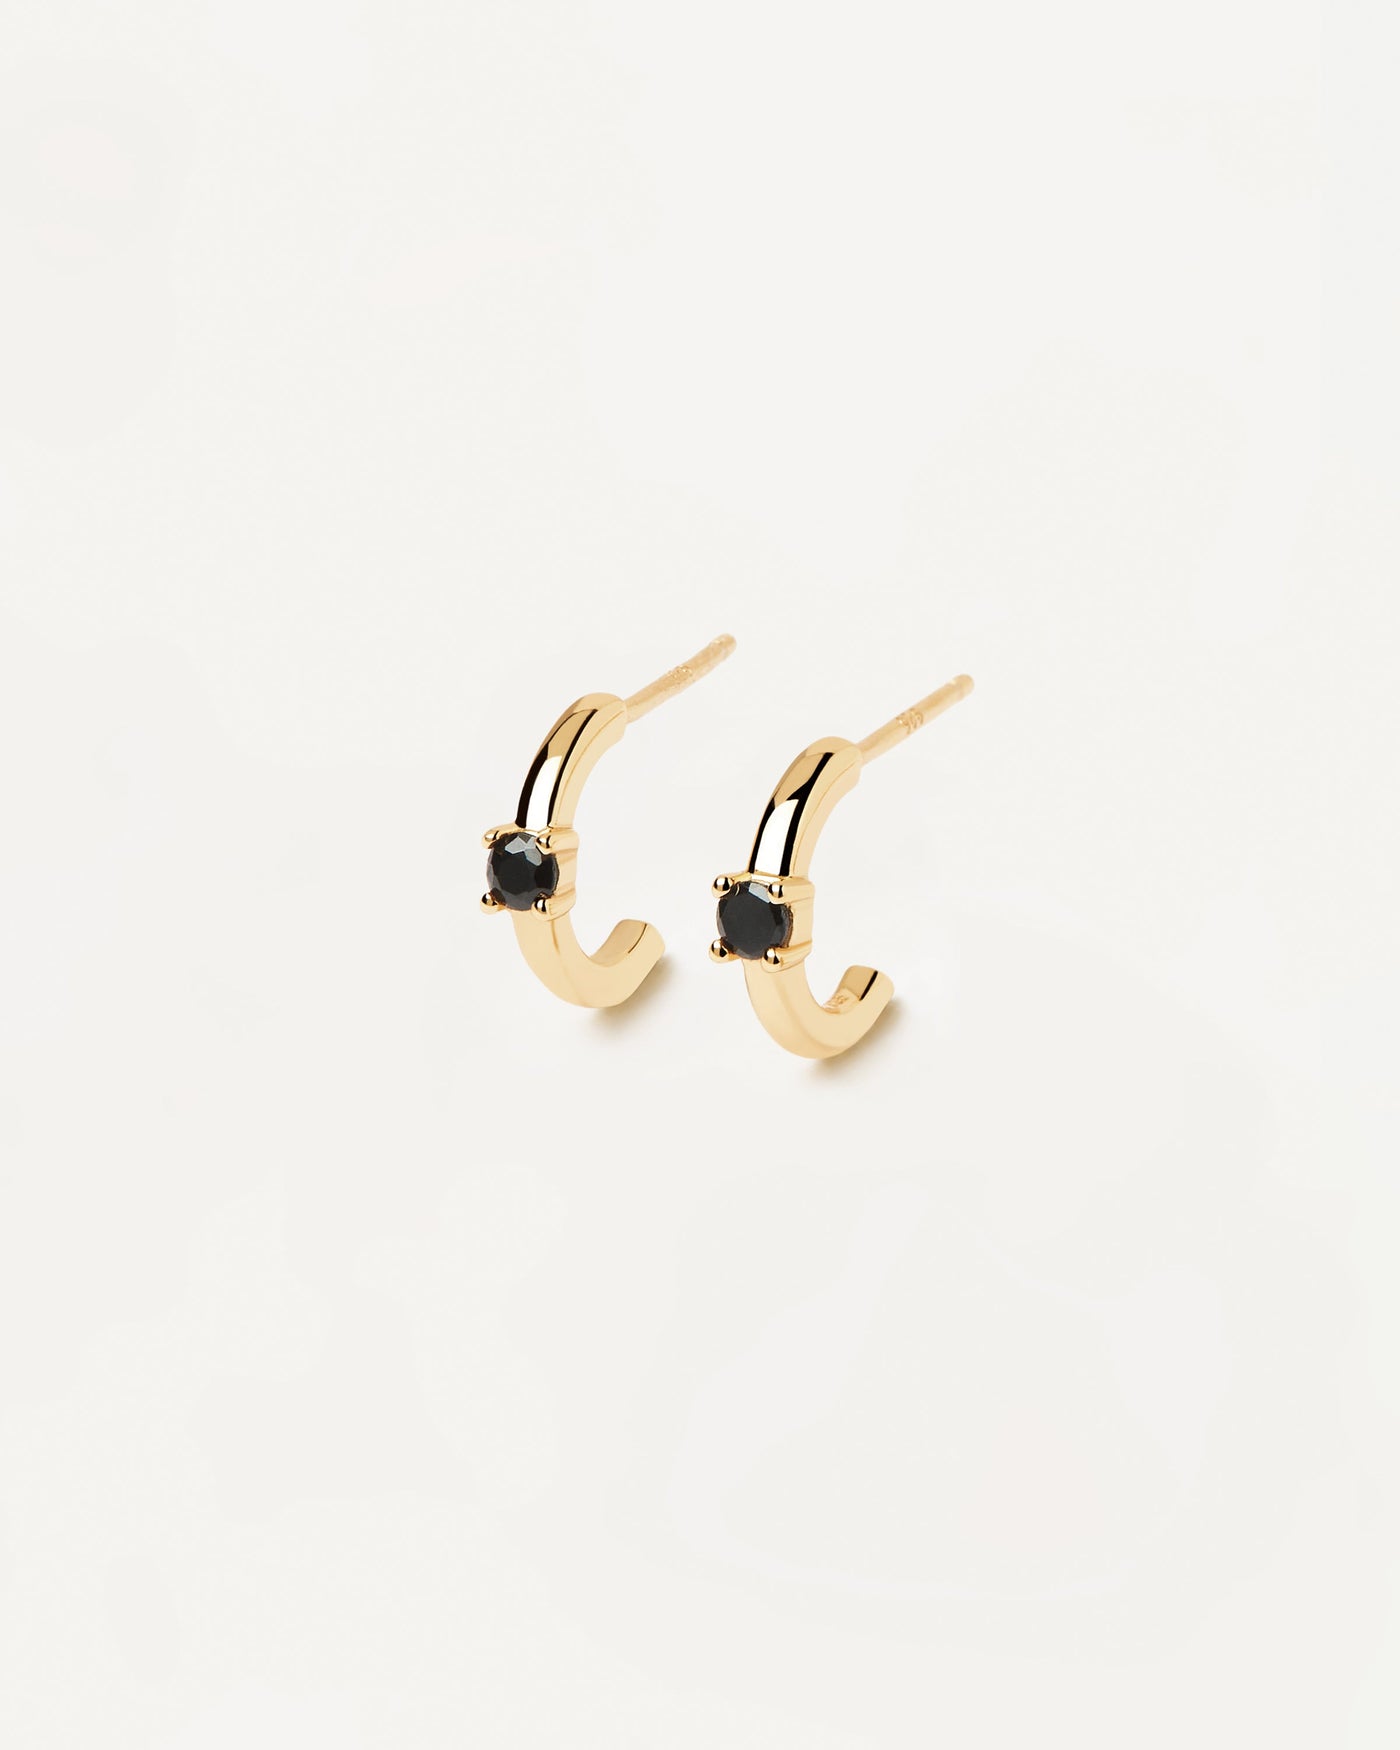 2023 Selection | Black Solitary Earrings. 18k gold plated silver c hoops with a round-cut black zirconia stone. Get the latest arrival from PDPAOLA. Place your order safely and get this Best Seller. Free Shipping.